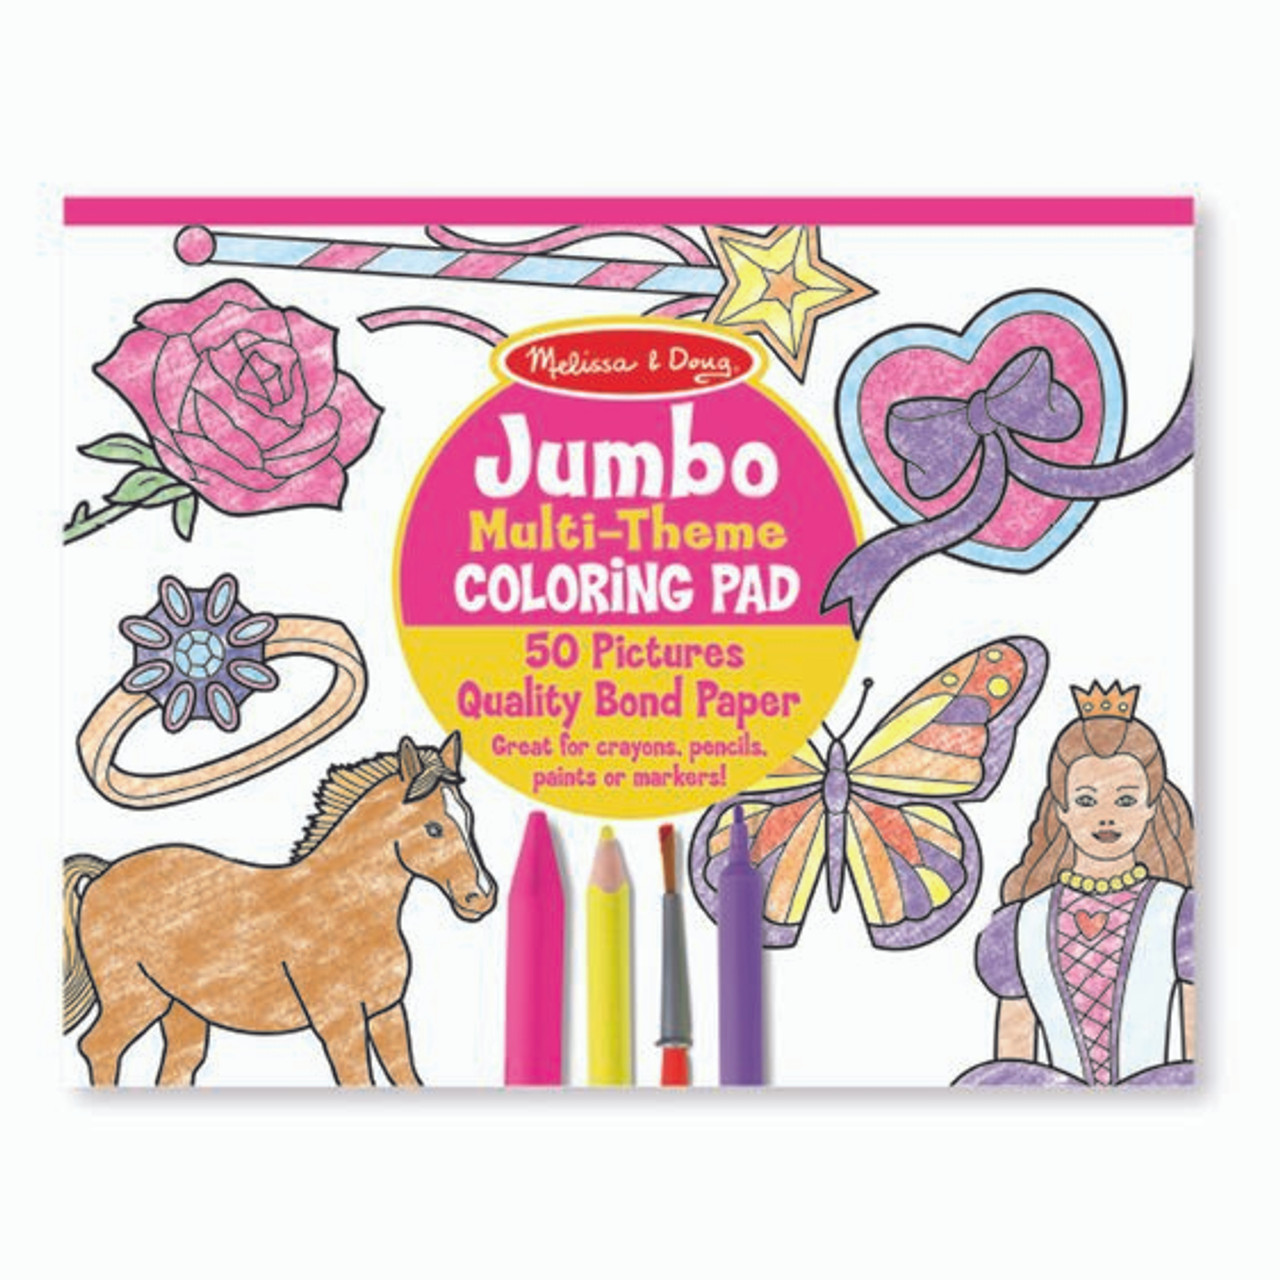 Jumbo Coloring Pad - Horses, Hearts, Flowers, and More!